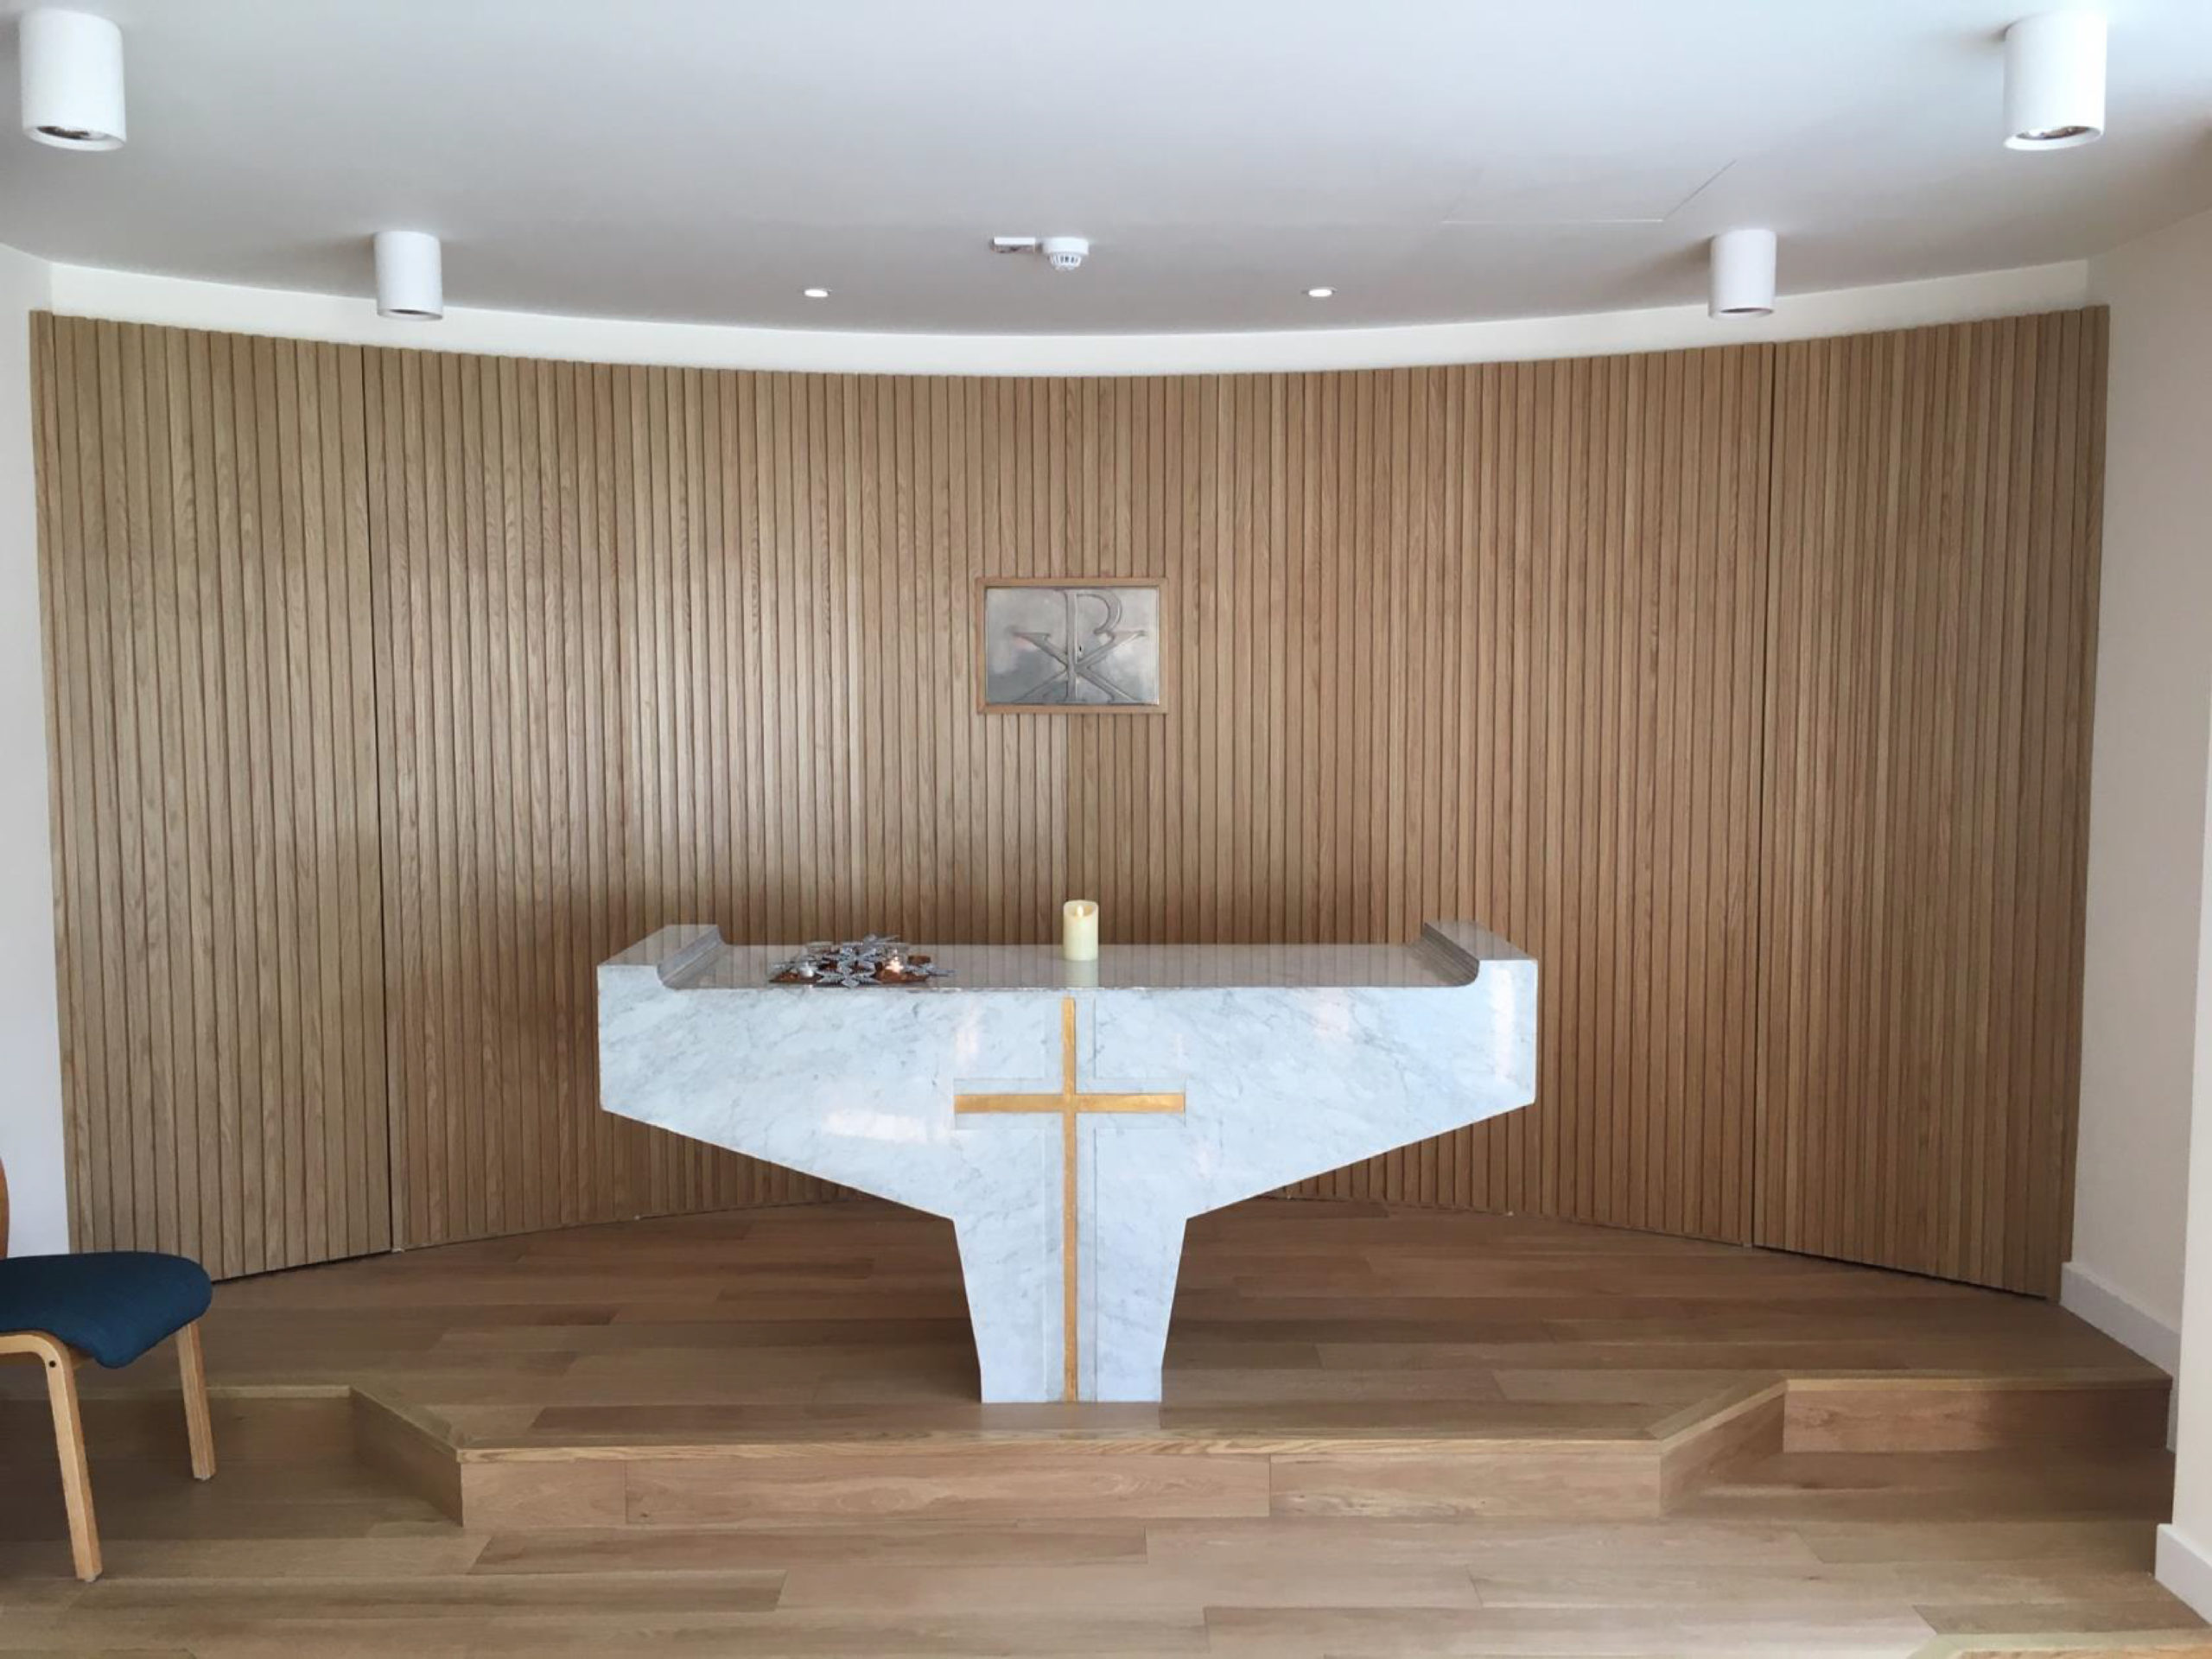 No priest on-site at the Church of Sweden in Hong Kong in spring 2021